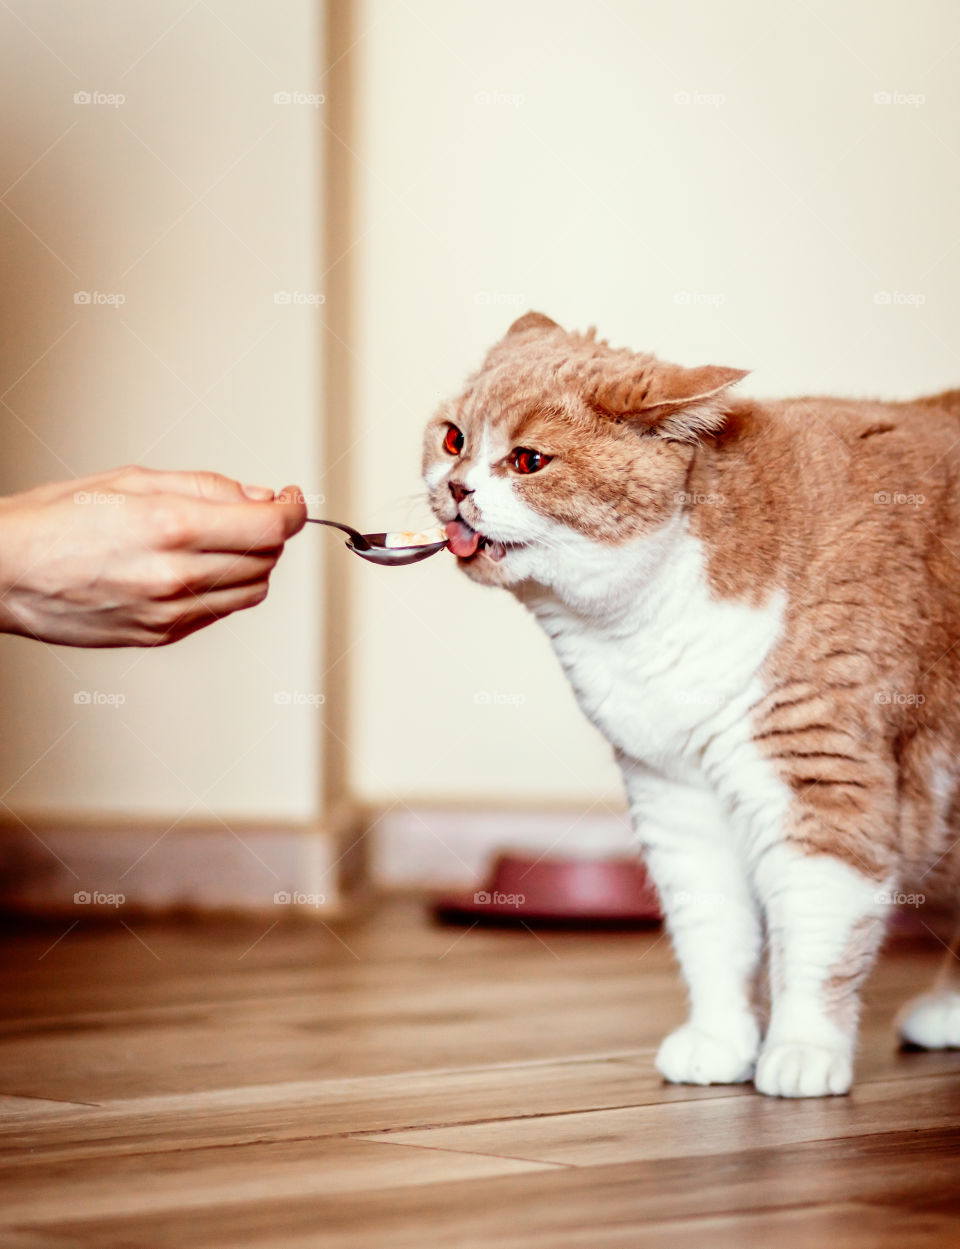 Fun moment with cute kitty eating some food.